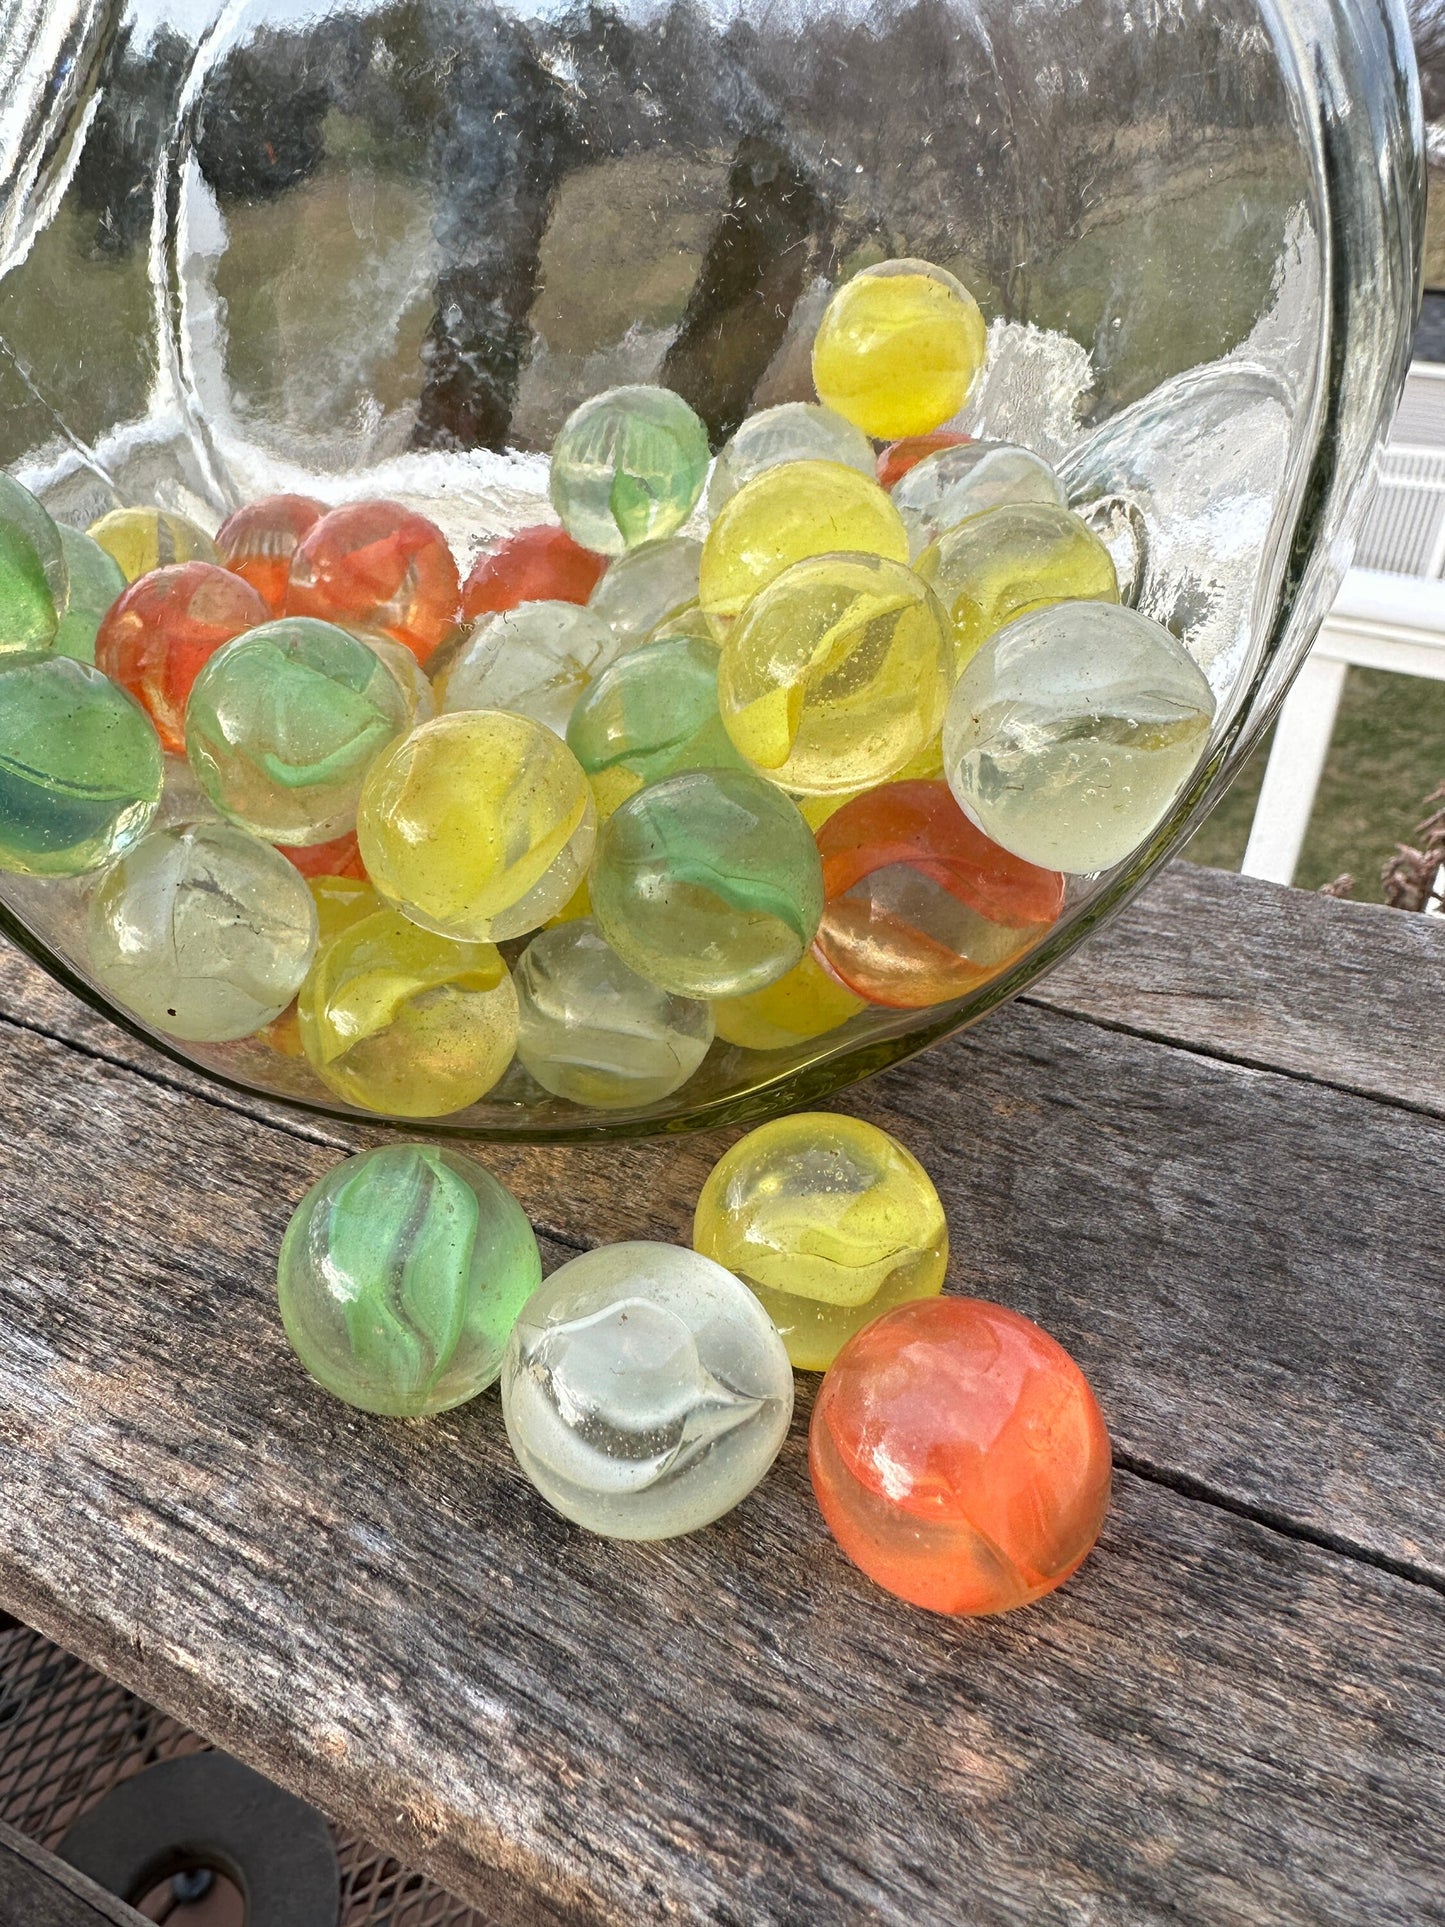 Vintage Set of Over 50 - 1” Large Cat Eye Yellow, Orange, Green, White / Shooter / 1 Large Shooter Marbles / Marbles In Candy Jar